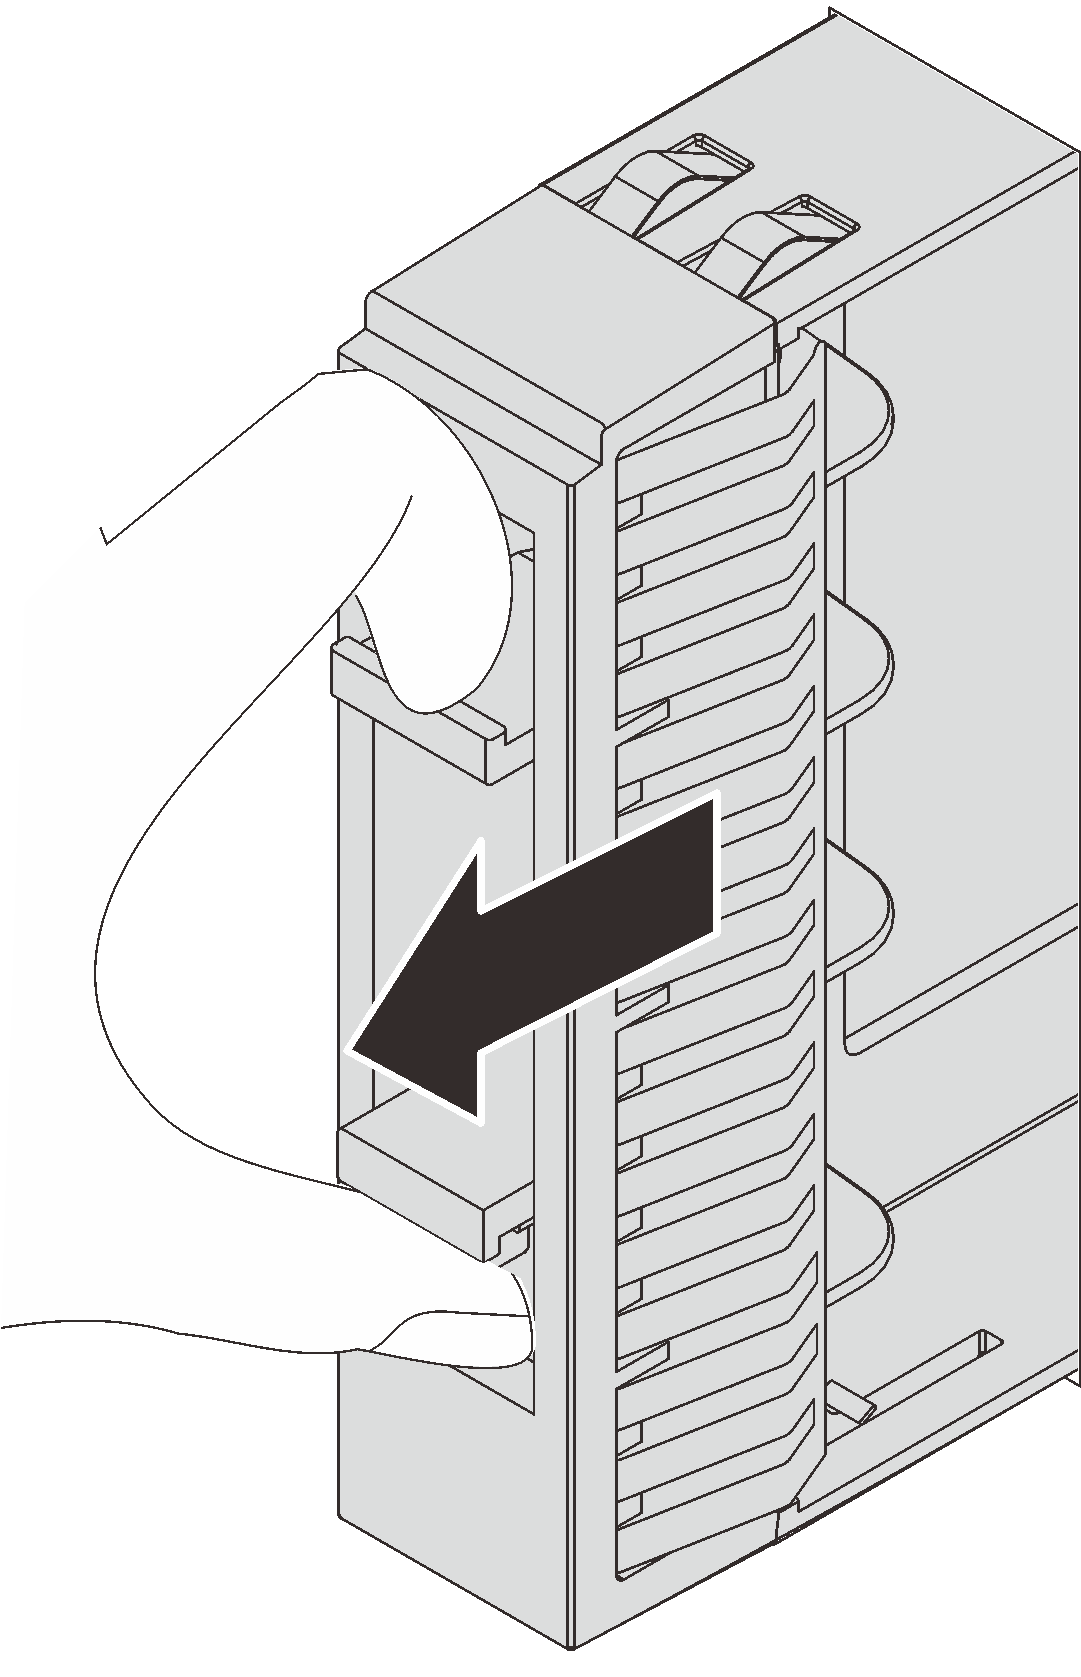 2.5-inch drive filler removal